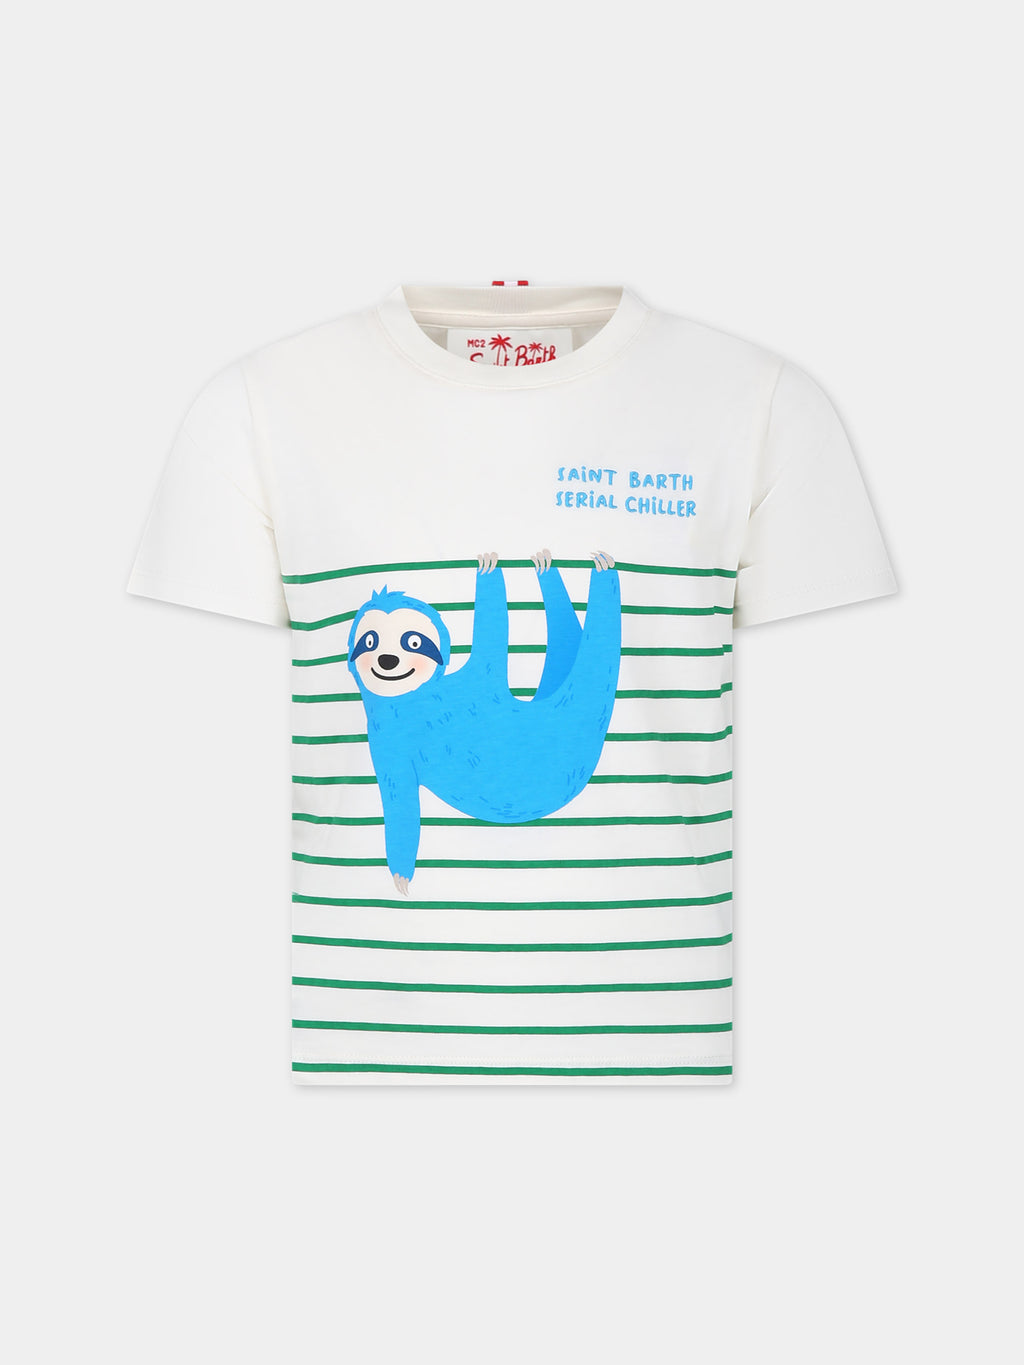 Ivory t-shirt for kids with sloth print